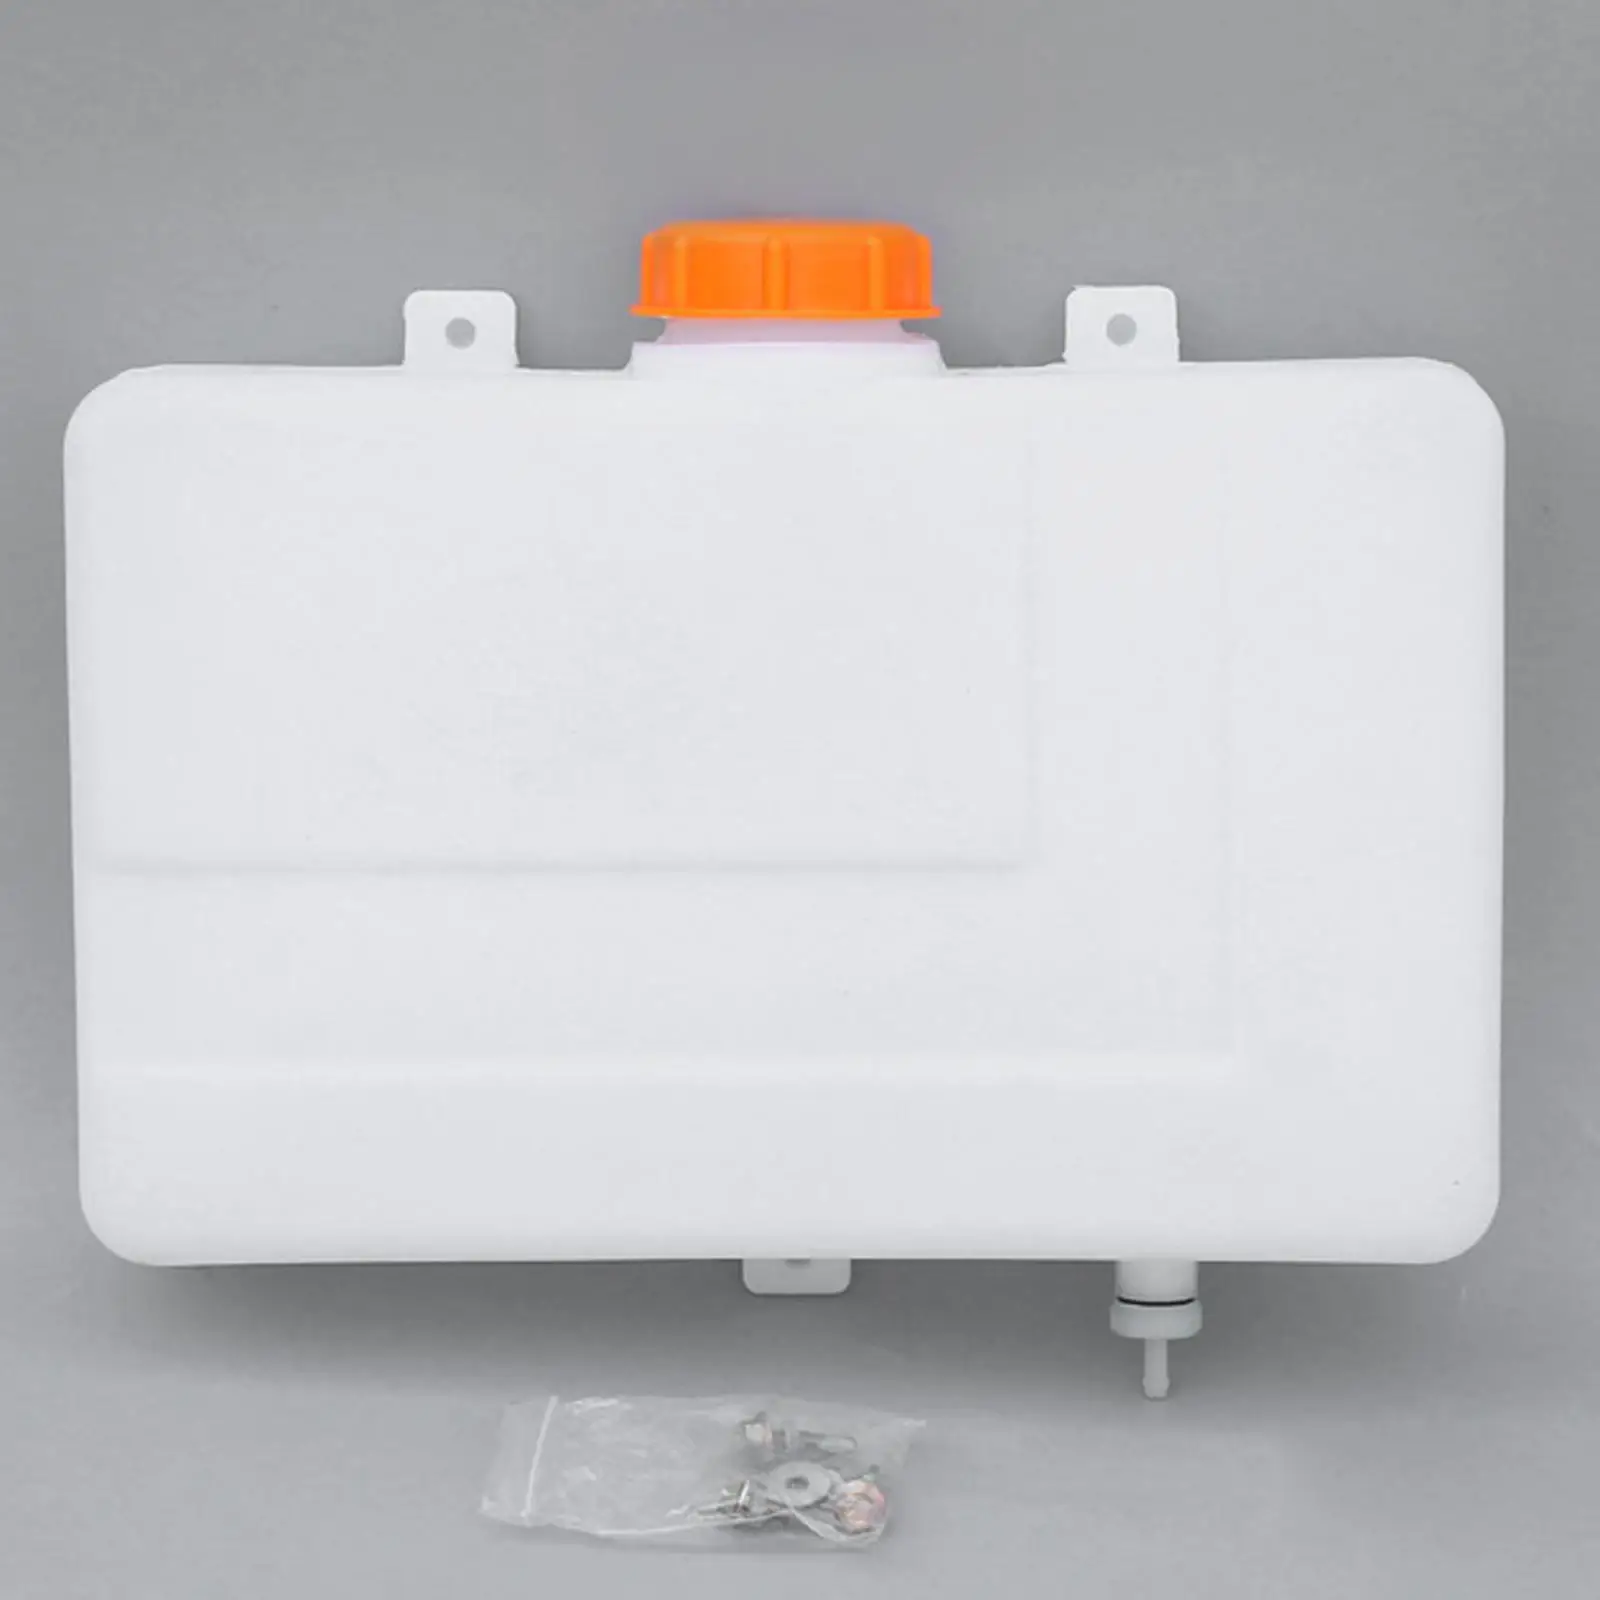 Gasoline Fuel Oil Tank 7L Plastic Spare Fuel Container Fit for Motorcycle ATV Most Cars